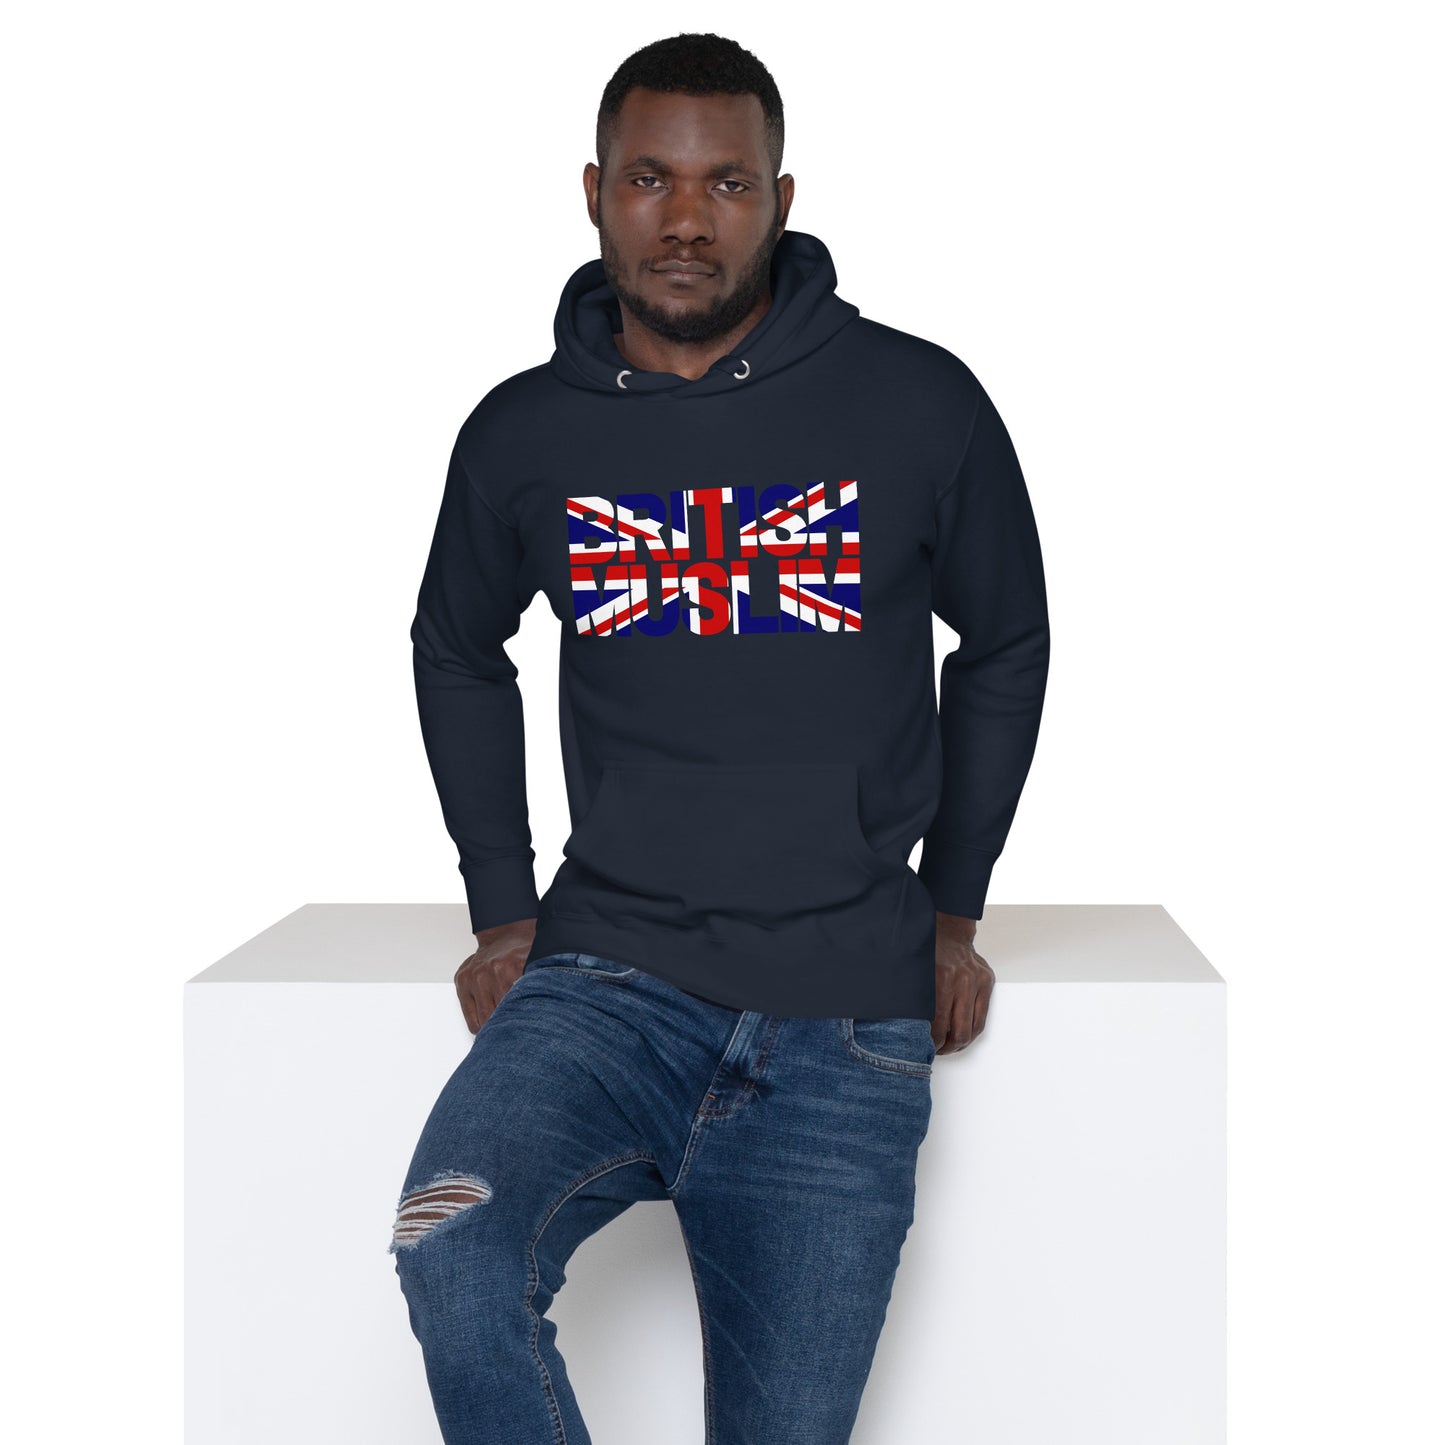 A man wearing a navy coloured Unisex Hoodie with the text saying BRITISH MUSLIM that is also in the colours of the british flag.